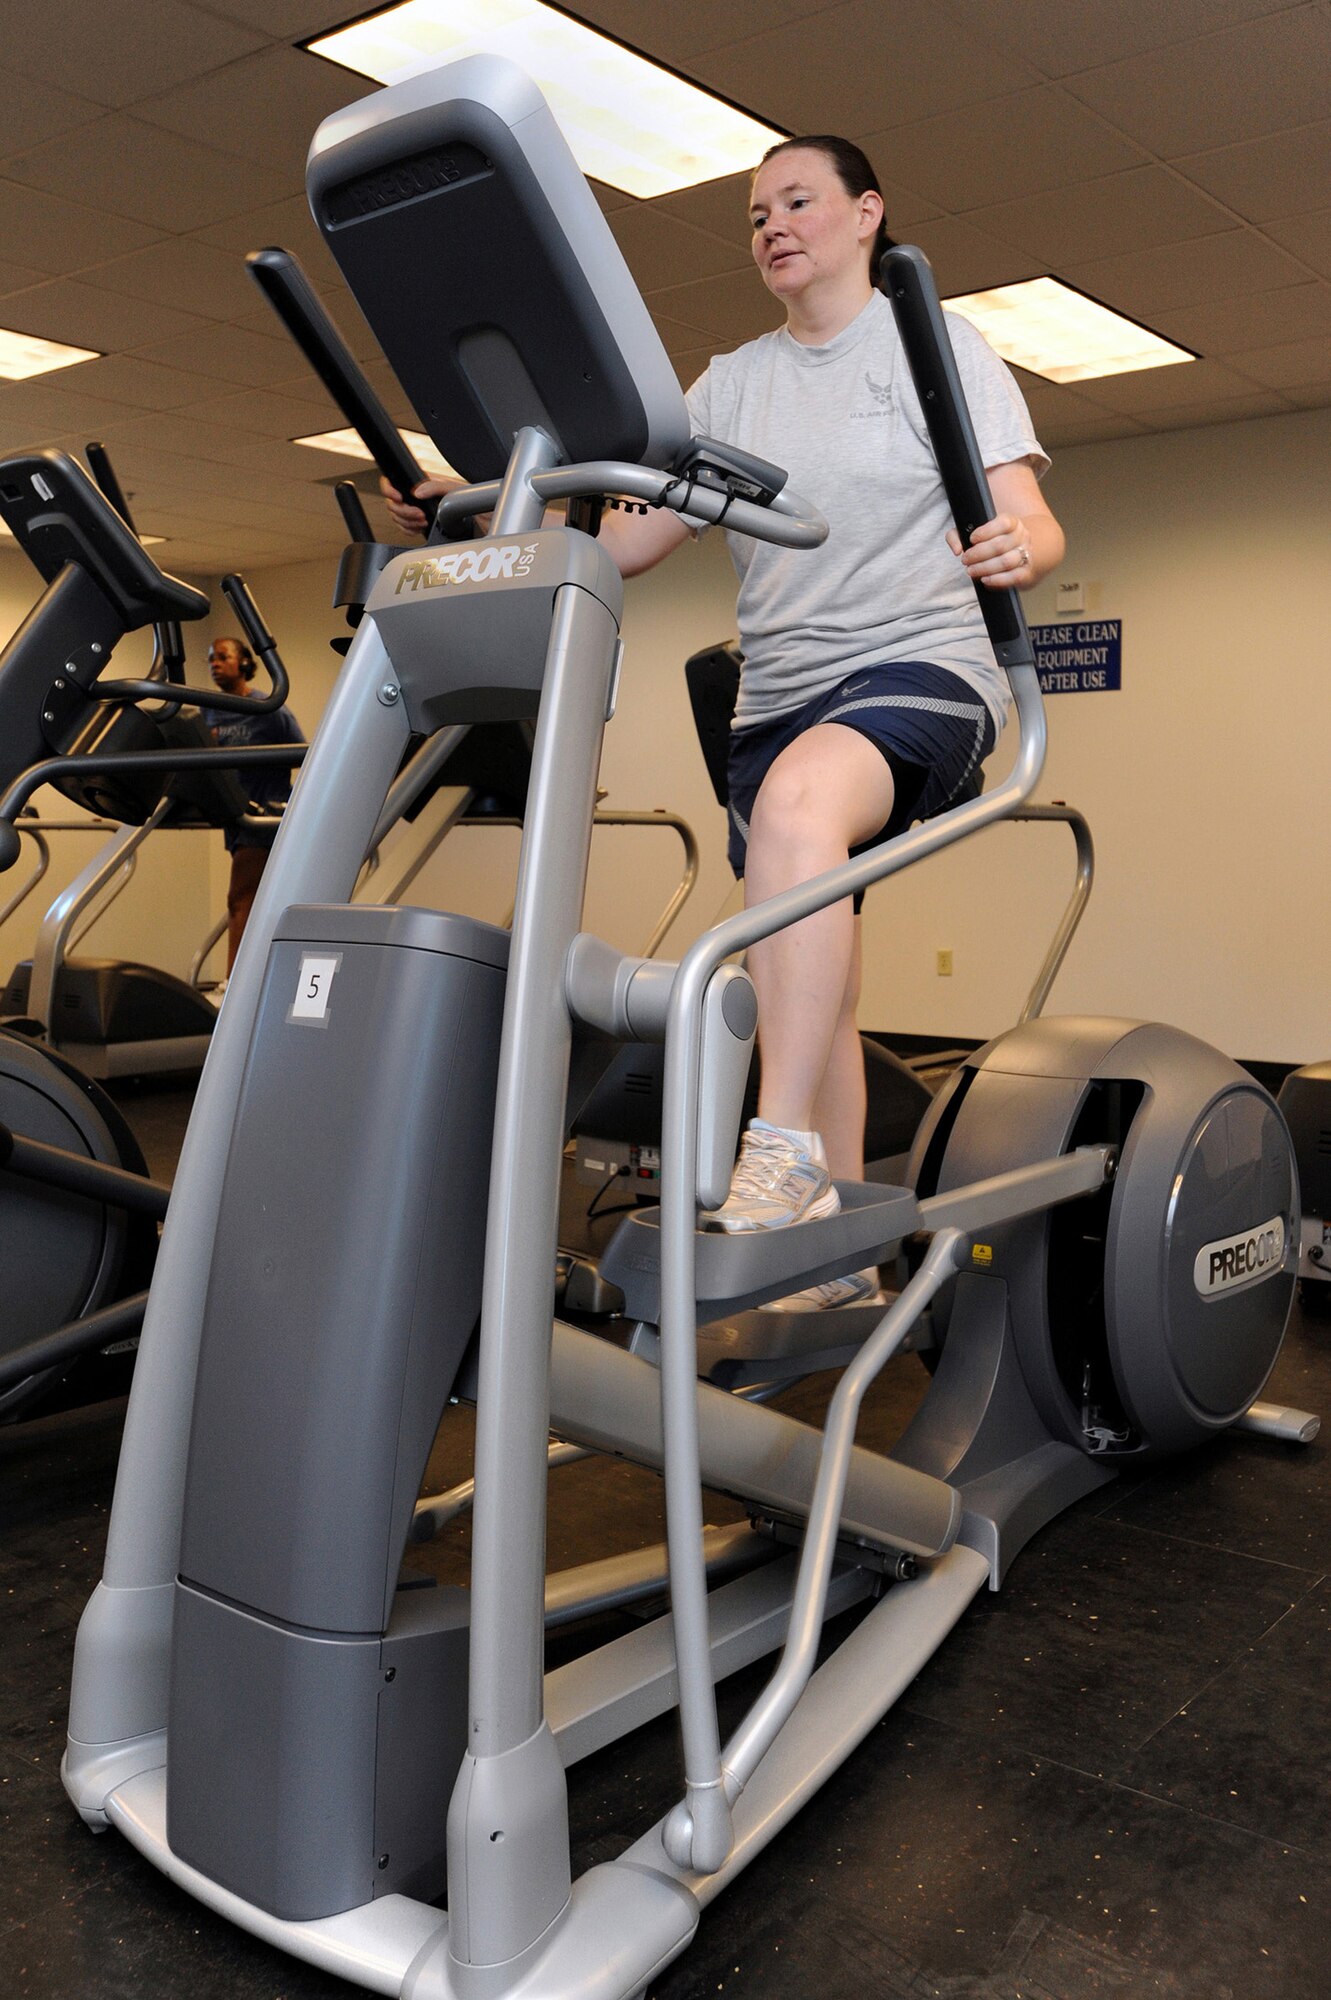 BUCKLEY AIR FORCE BASE, Colo. - Airman 1st Class Lori Case, 566th
Intelligence Squadron, works out on an elliptical trainer at the Fitness
Center here Aug. 5. The 460th Force Support Squadron recently ordered
five new ellipticals as well as other cardio equipment. (U.S. Air Force photo
by Senior Airman John Easterling)